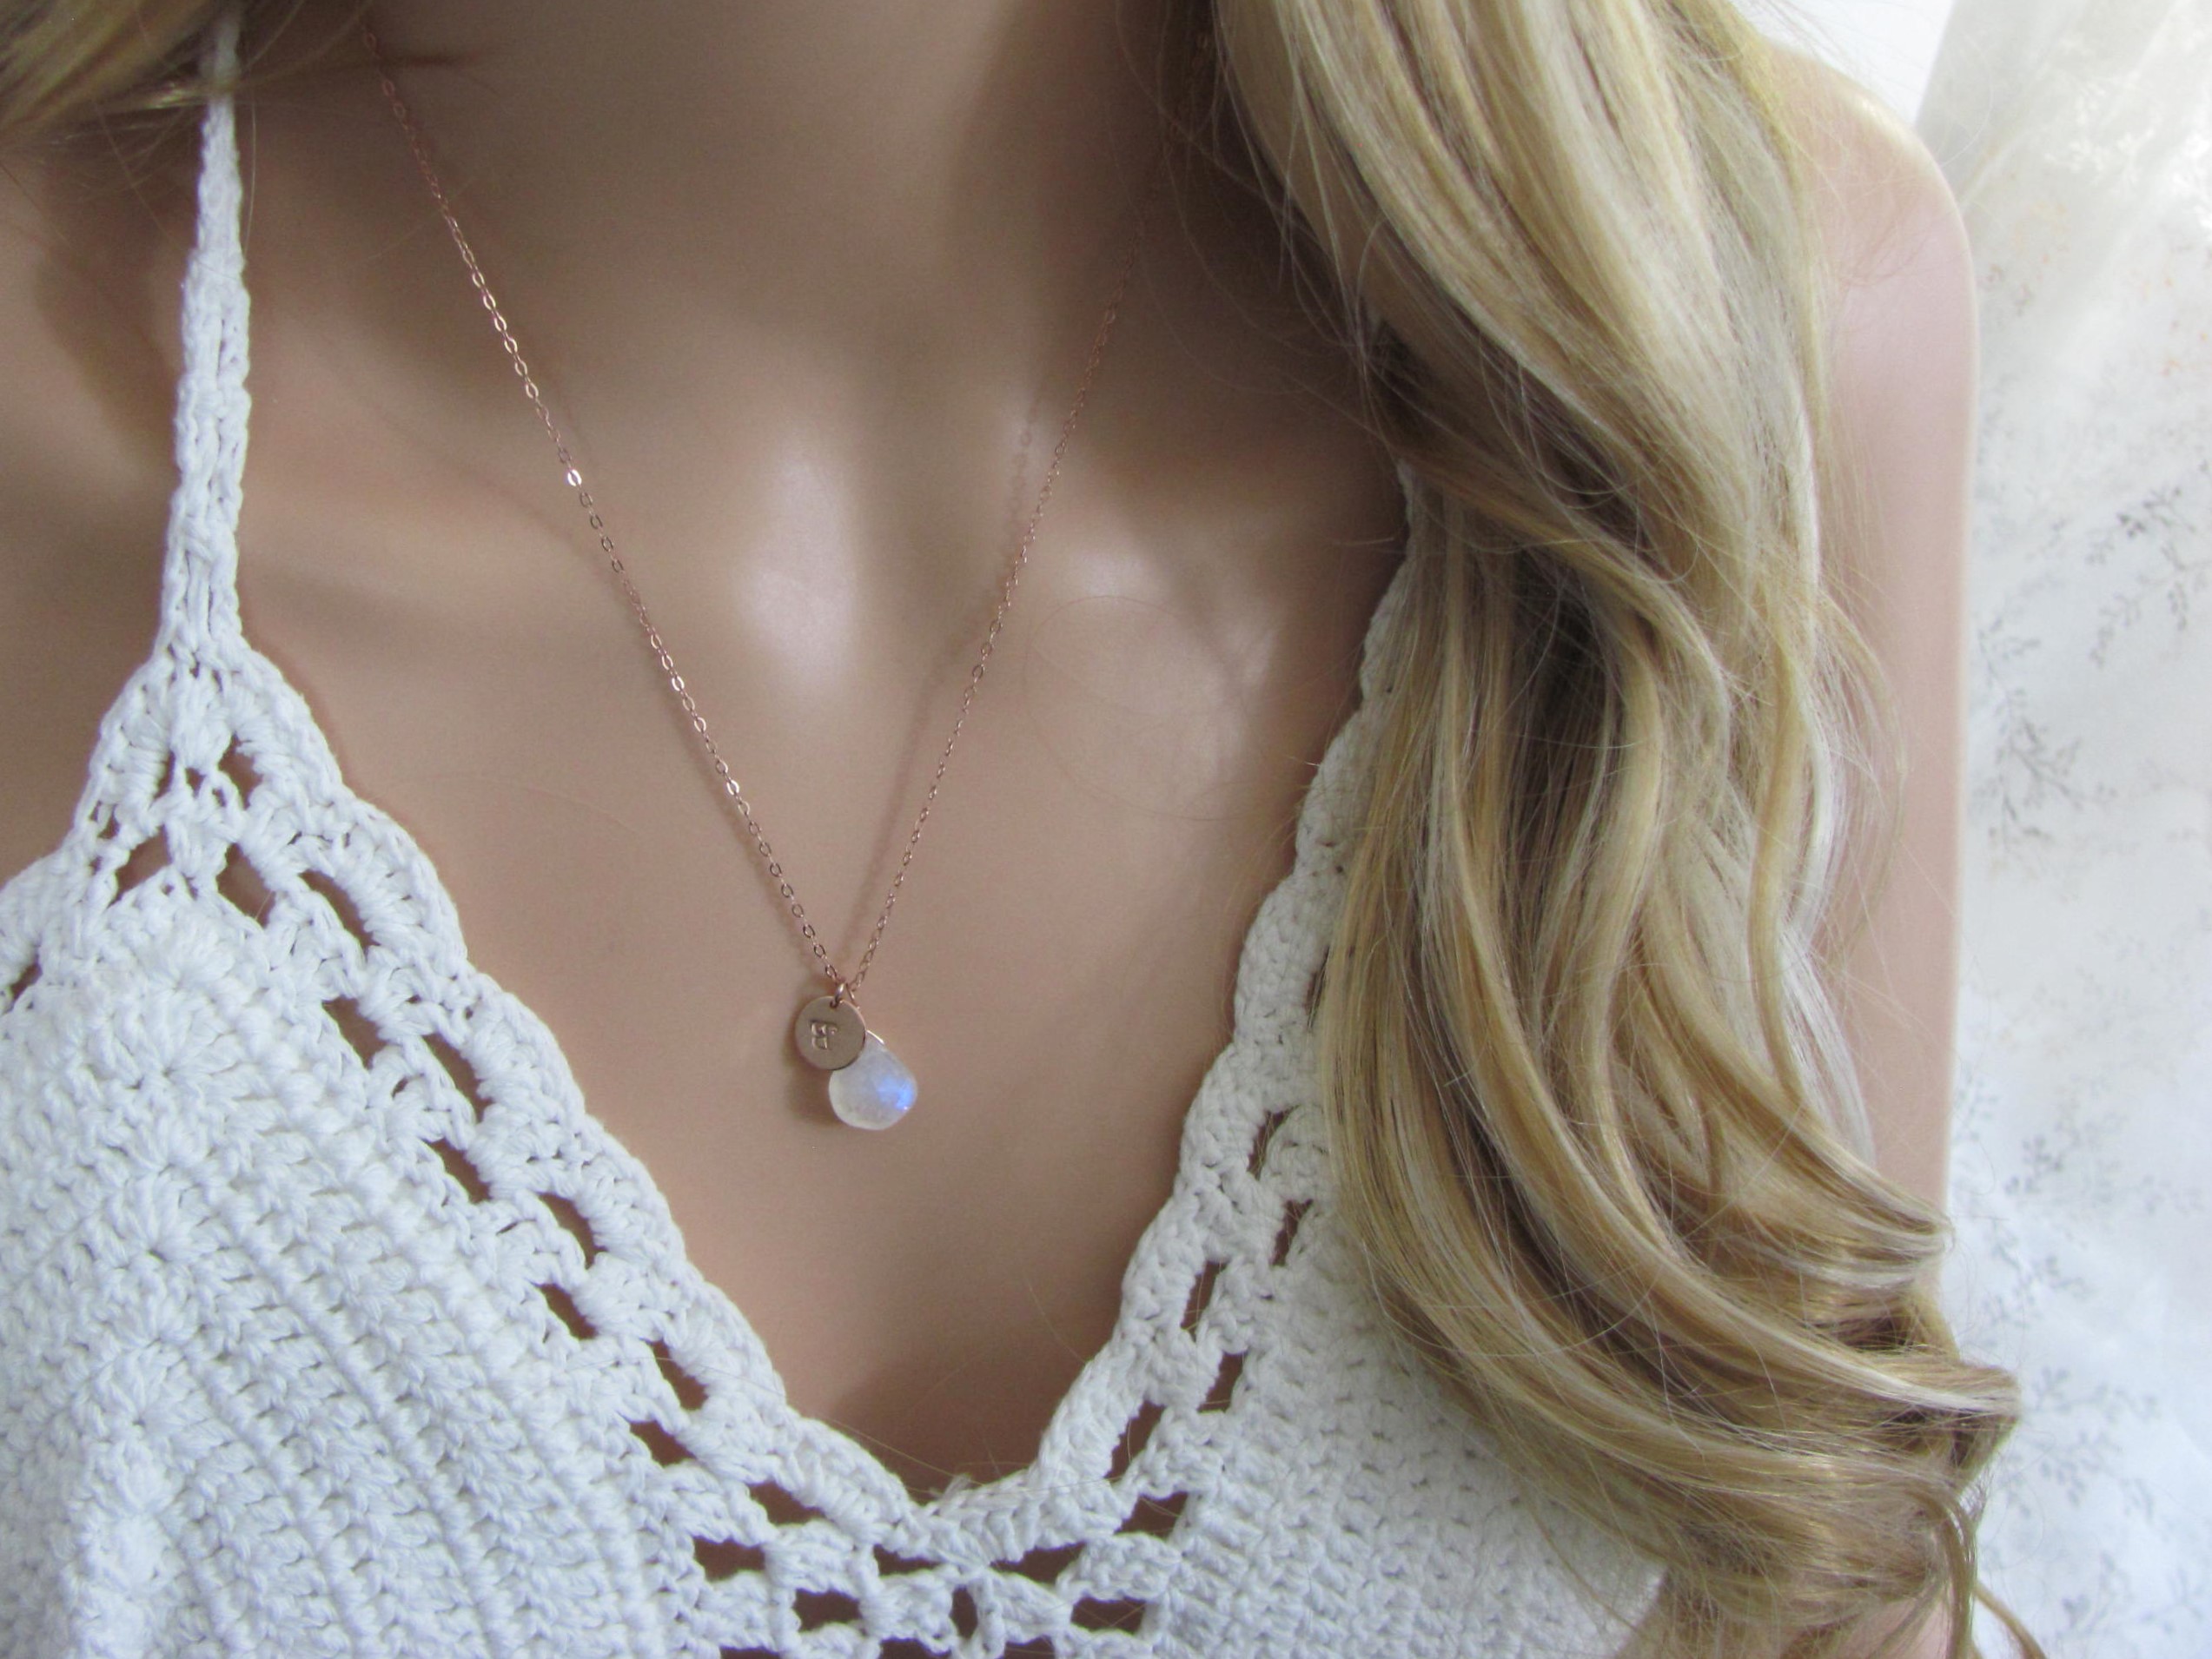 Moonstone Necklace Personalized with Initial Disc, Bridesmaid Gifts